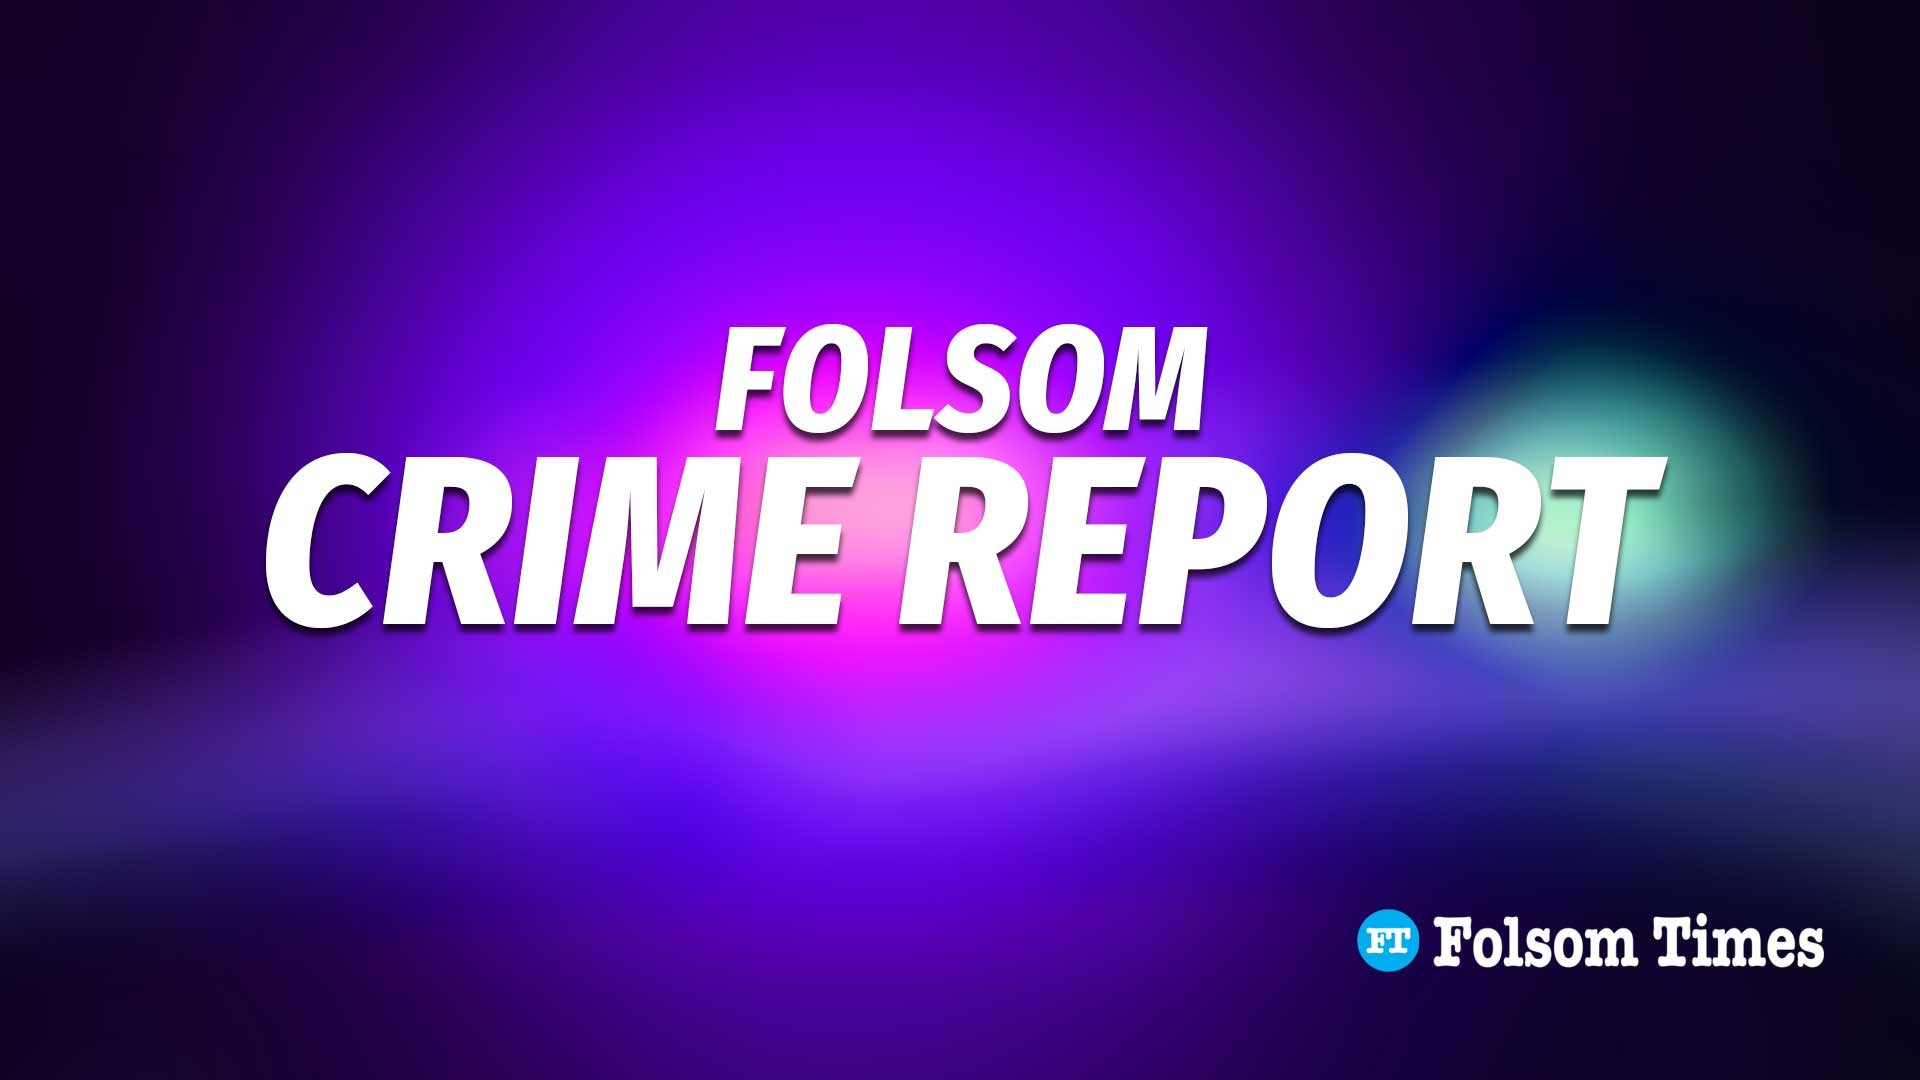 Stolen tractor, mail theft, battery and more top latest Folsom crime reports